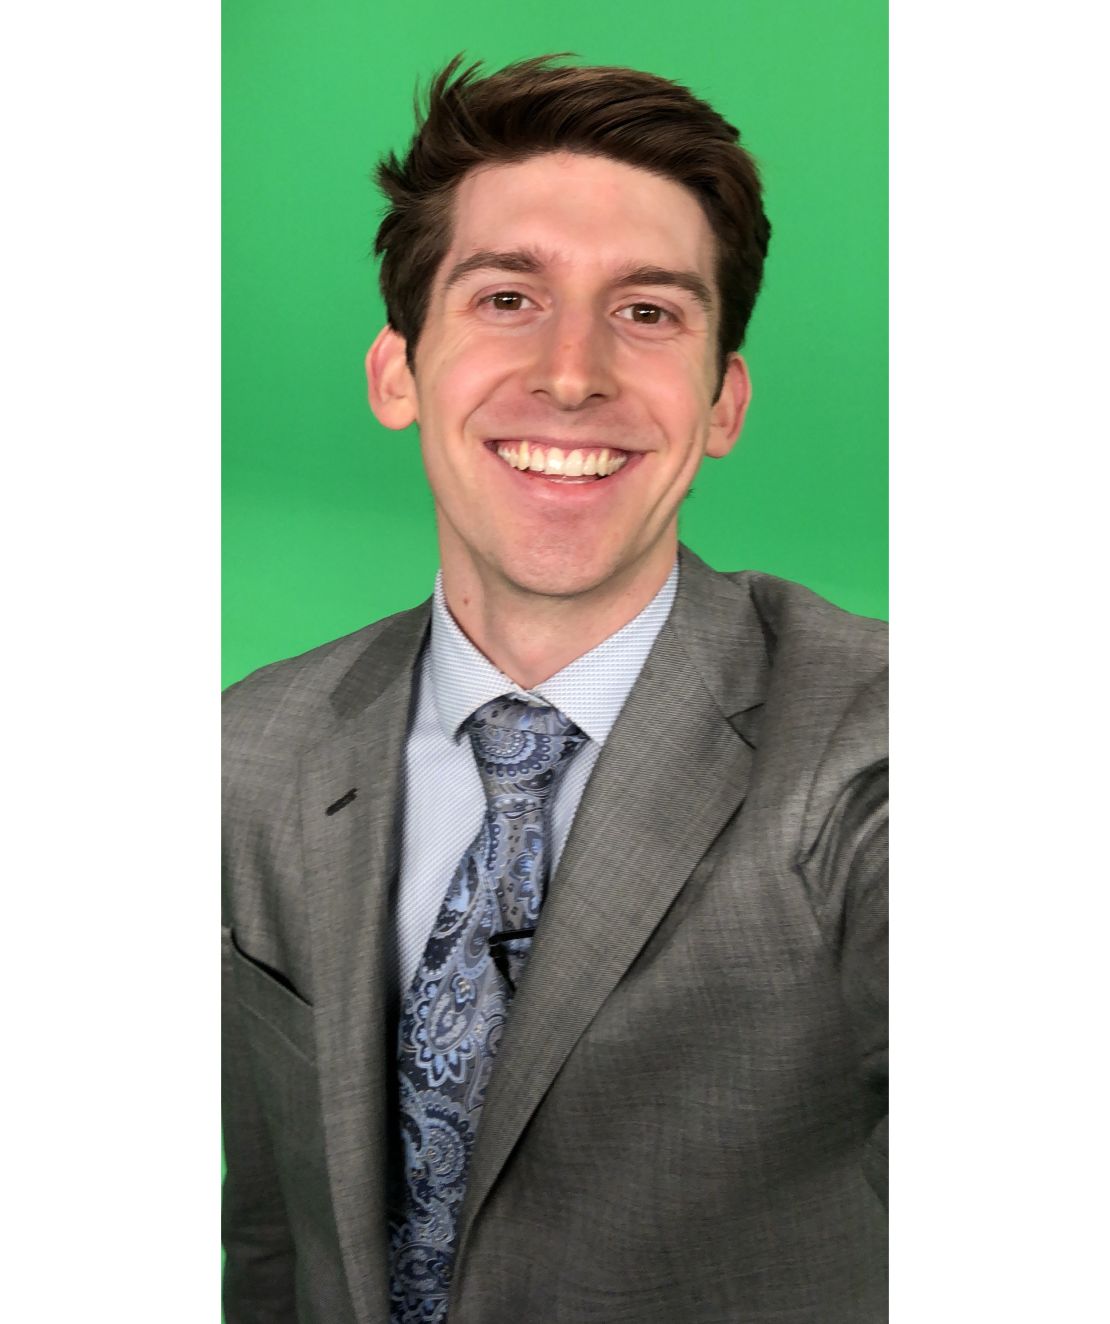 Trevor Cadigan, 26, was a video journalist and recently an intern at Business Insider.